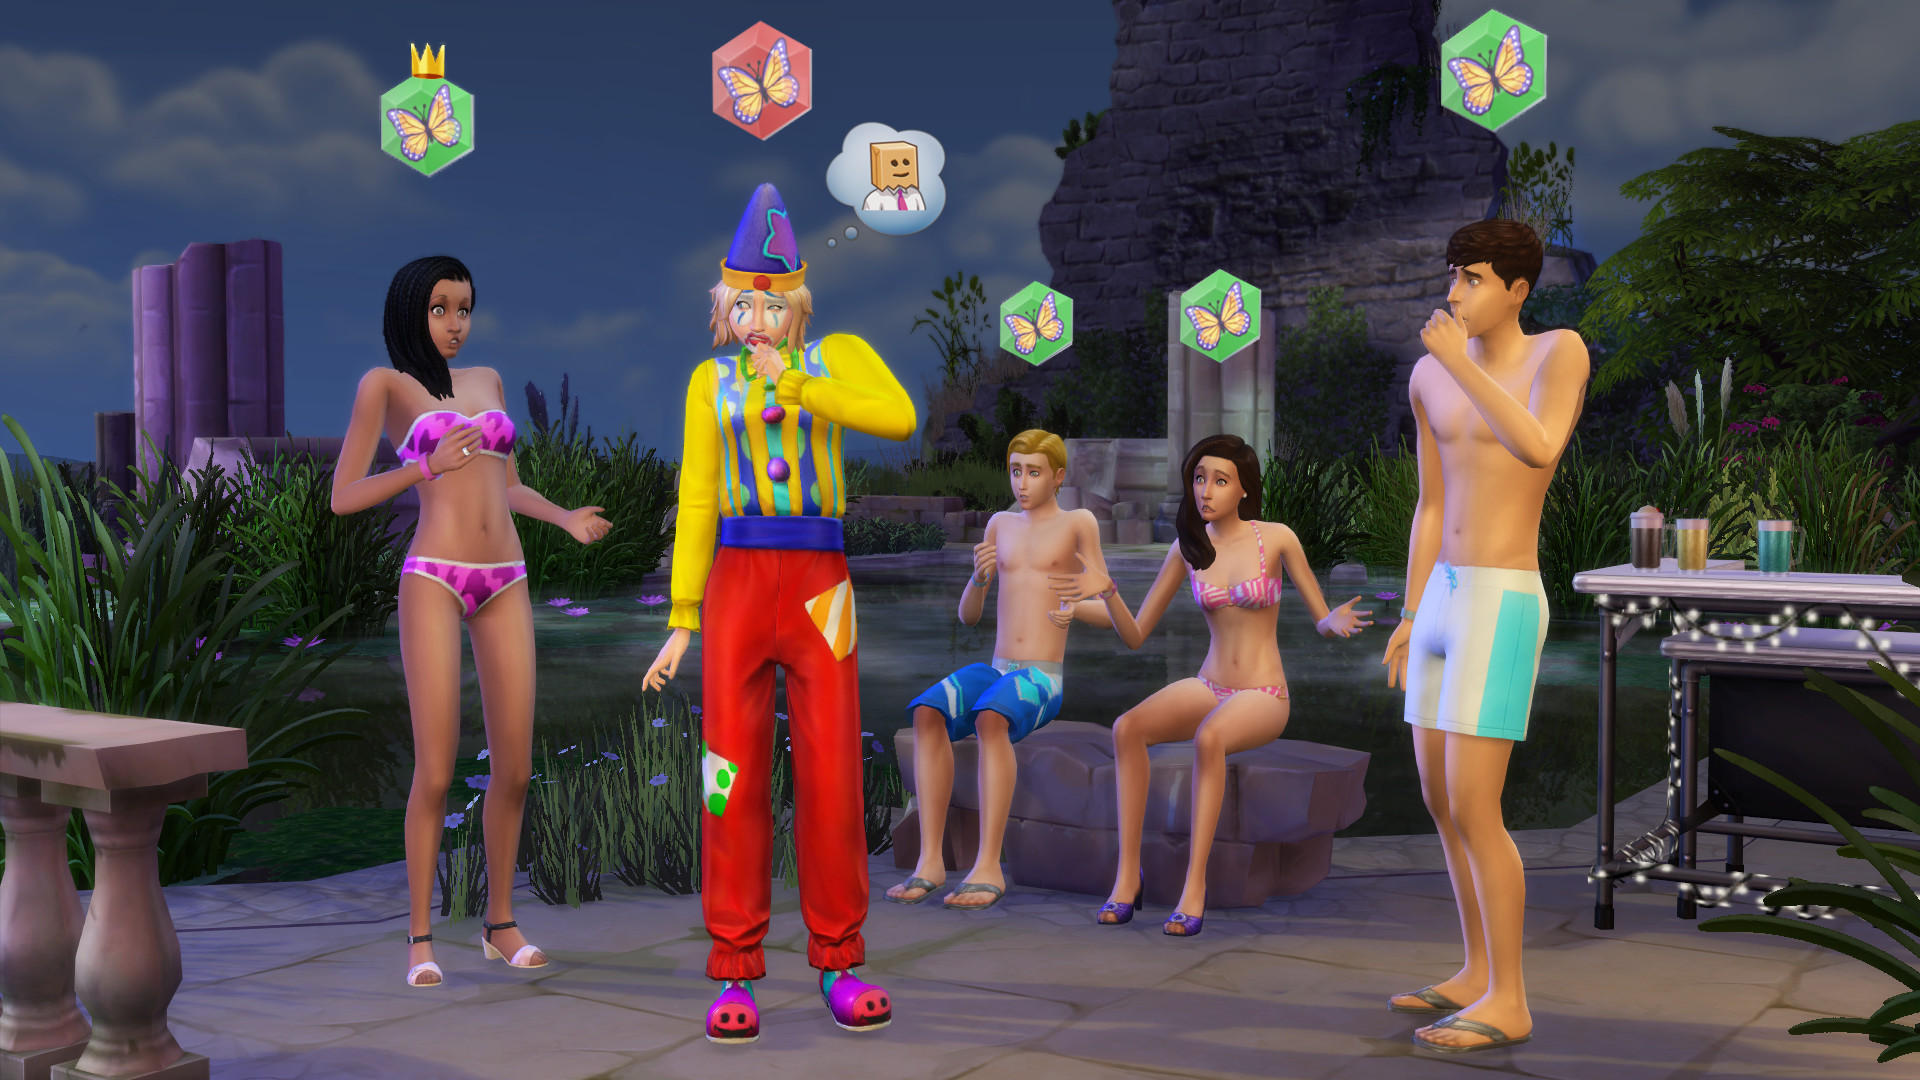 The sims 4 steam price фото 91